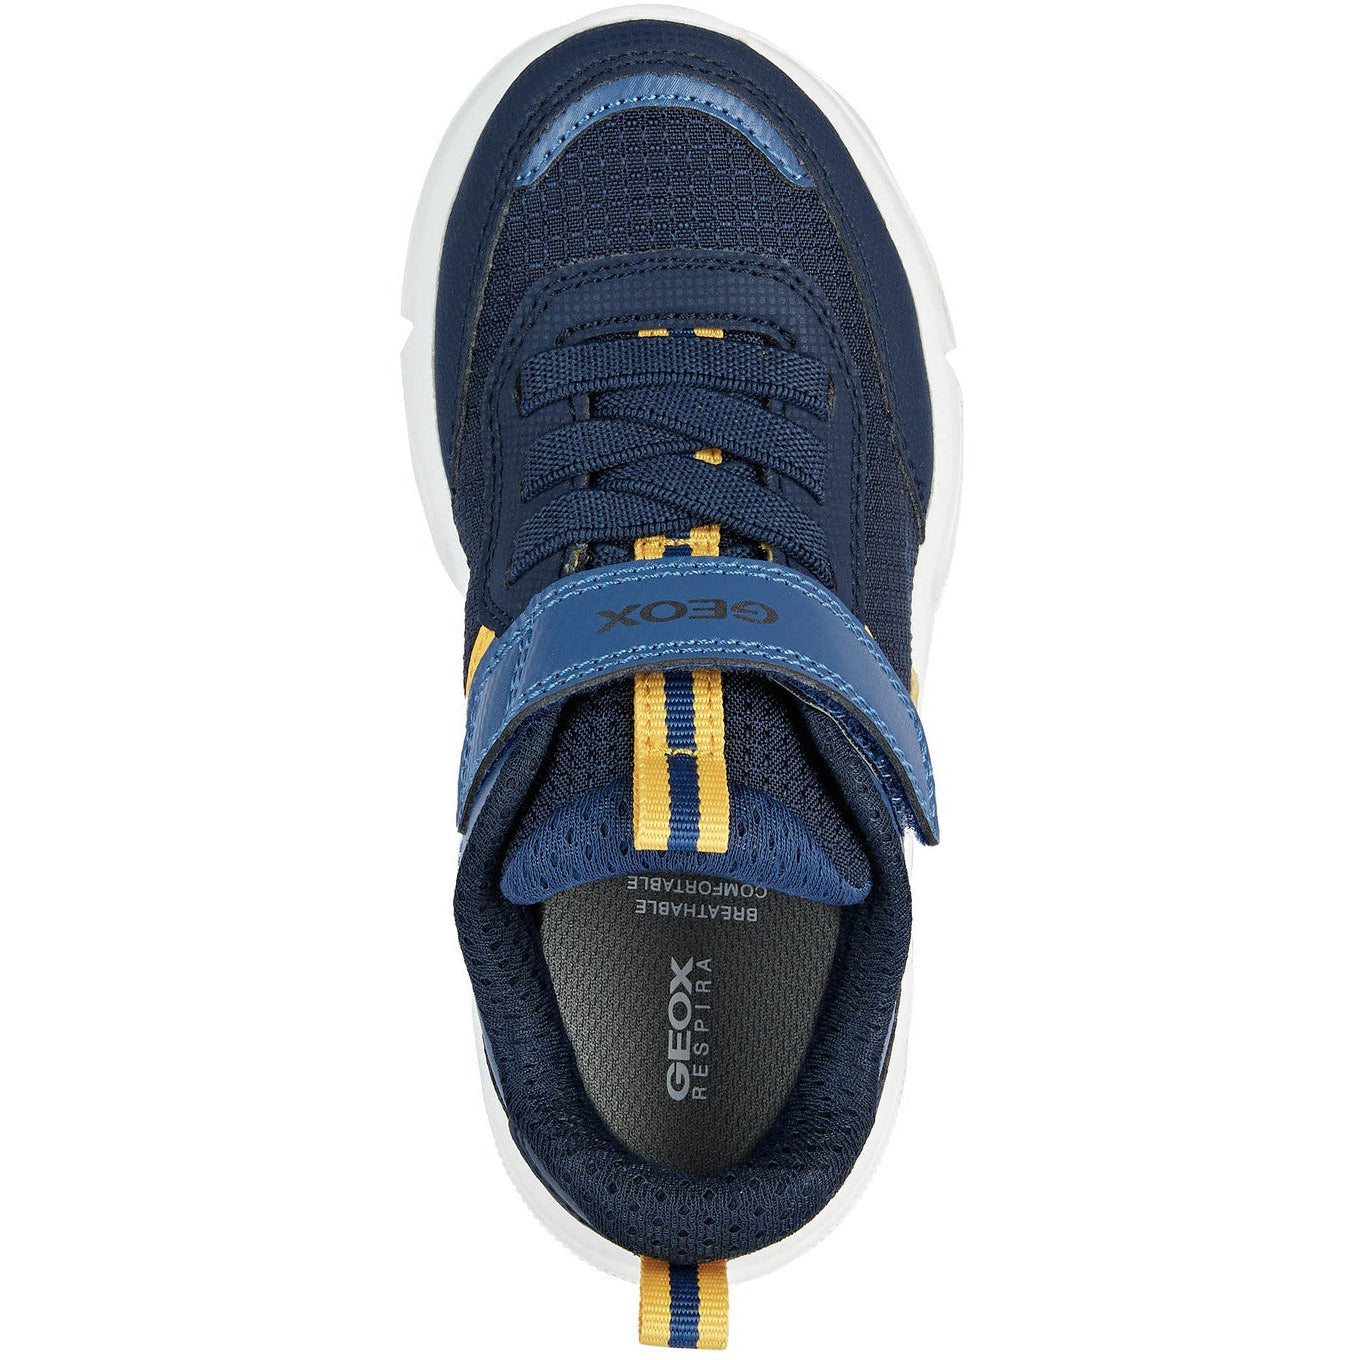 Geox Aril(J16DMA)- Boys Velcro Trainer  in Navy/Yellow . Geox Shoes | Childrens Shoe Fitting | Wisemans | Bantry | West Cork | Ireland